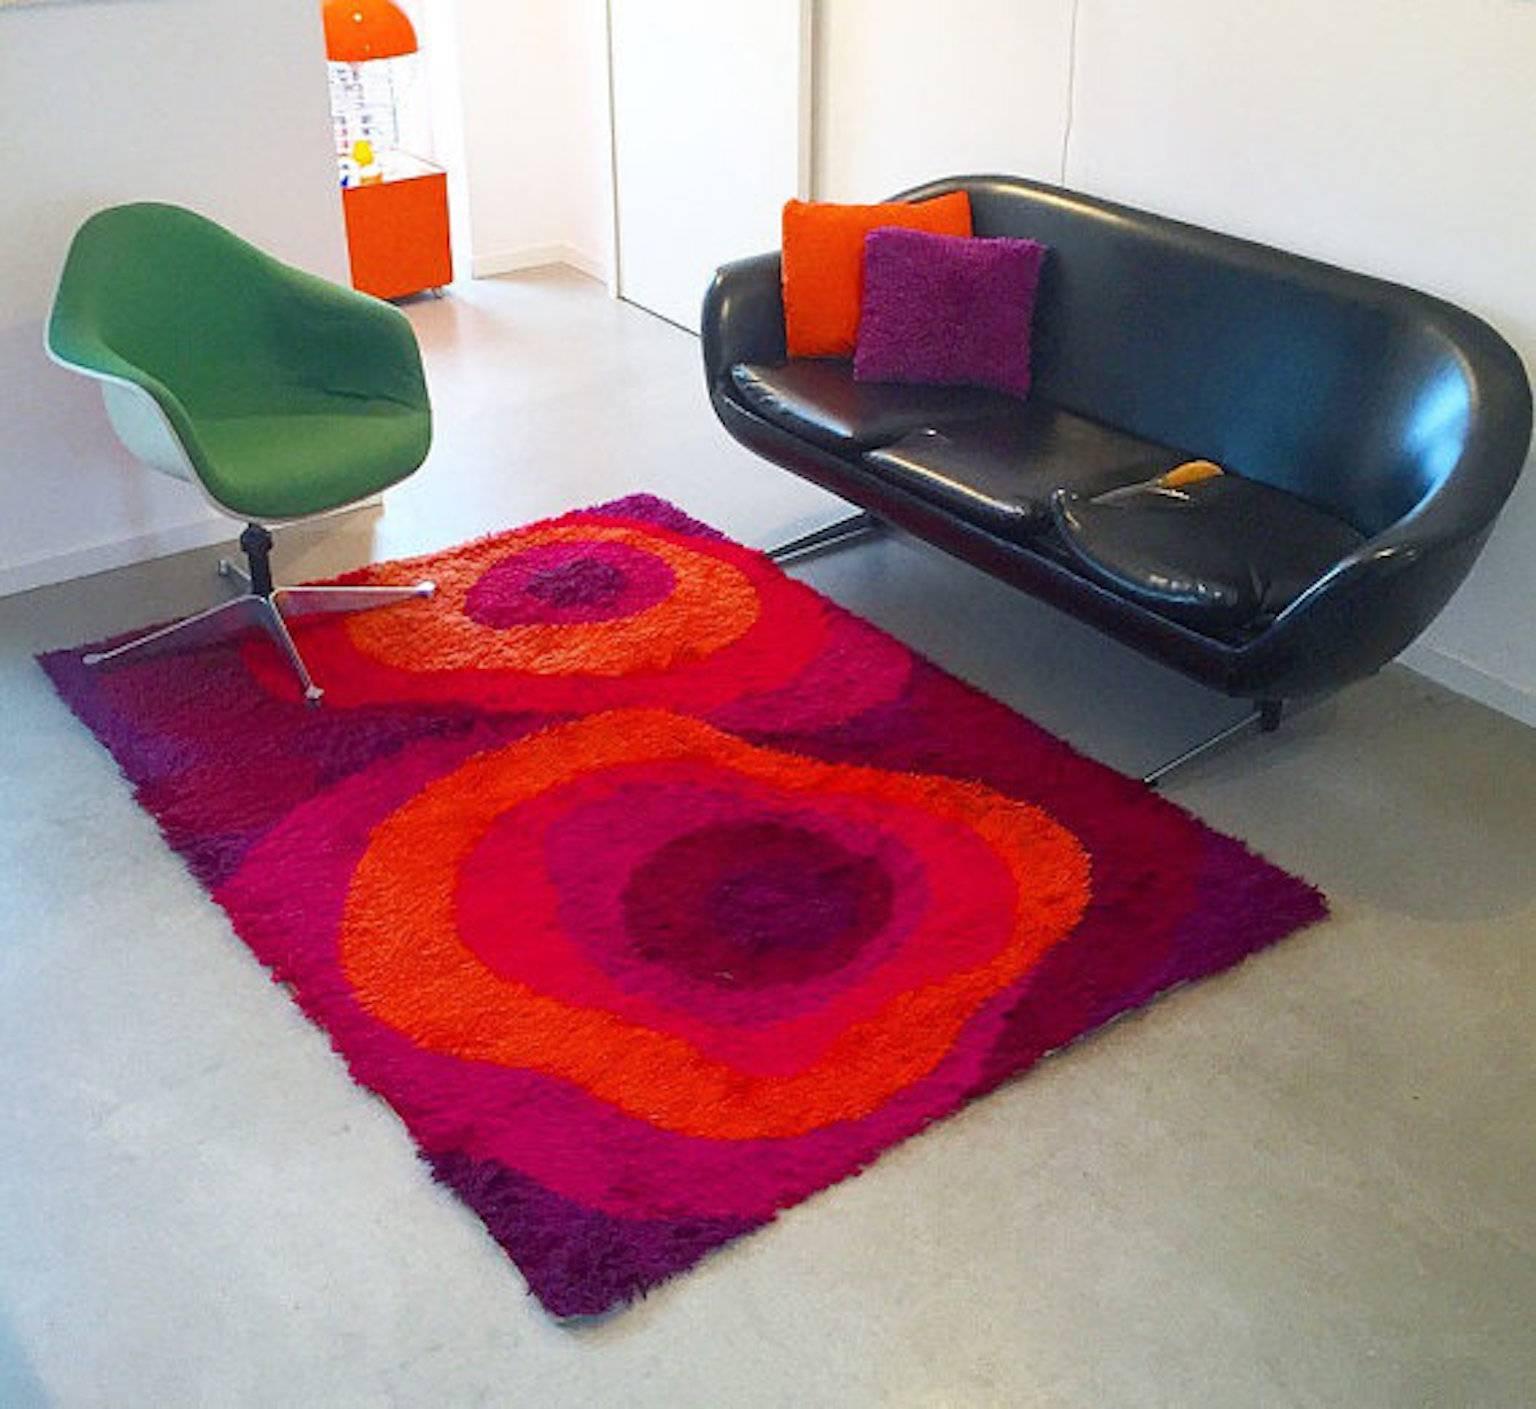 This gorgeous thick pile Rya rug was designed by in-house designer Carin Agner Nielsen for Ege Taepper of Denmark around late 60s or early 70s.

The abstract pattern of red and purple colors leads you right back to the era of Verner Panton, where